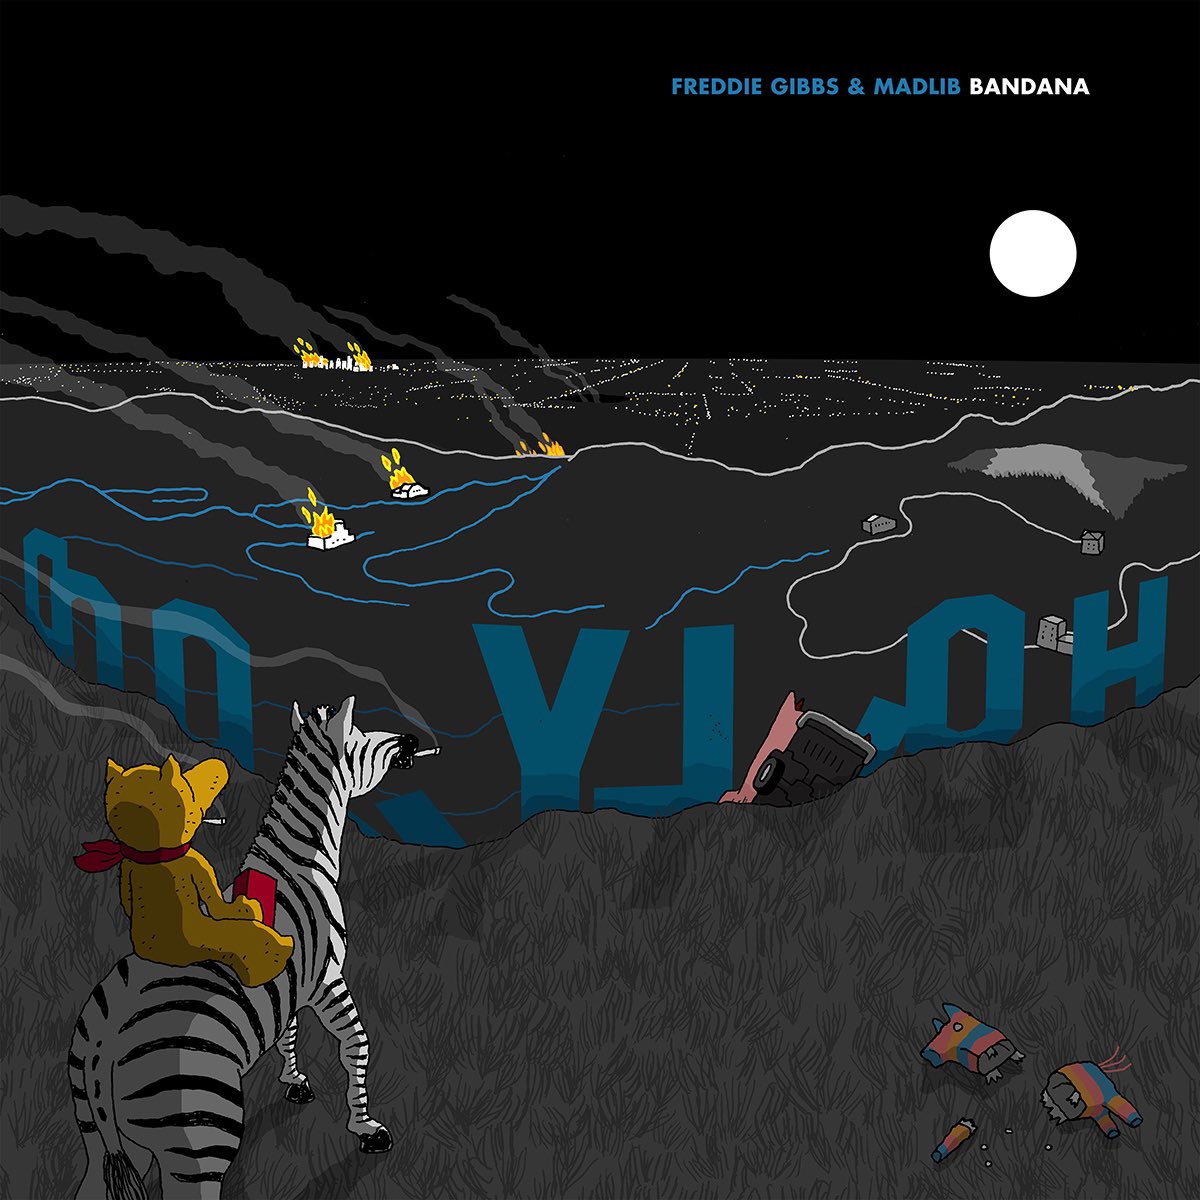 3. Bandana - Freddie Gibbs and MadlibMight get hate for having this at 3, but that doesn’t mean I don’t love this album! I almost thought it’d be impossible for them to up the ante after Piñata, but they did it here. My favs are: Freestyle Shit, Cataracts, and Palmolive